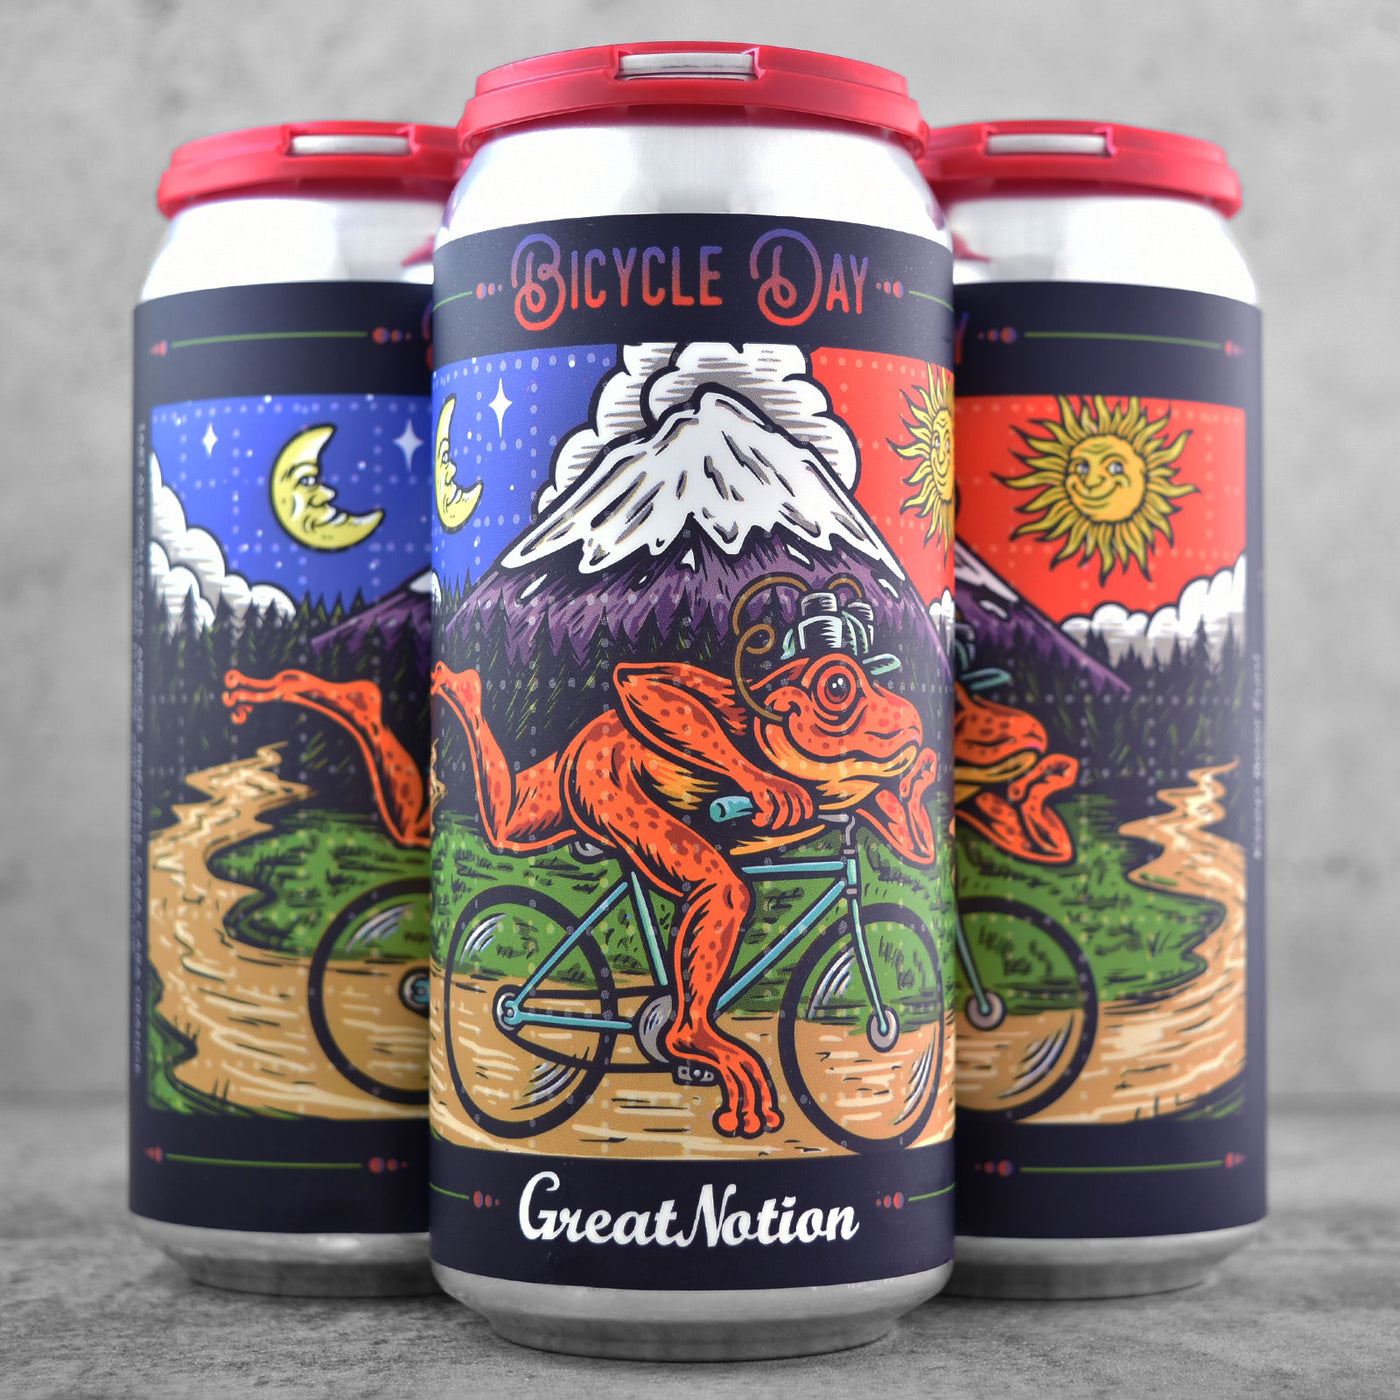 Great Notion Bicycle Day